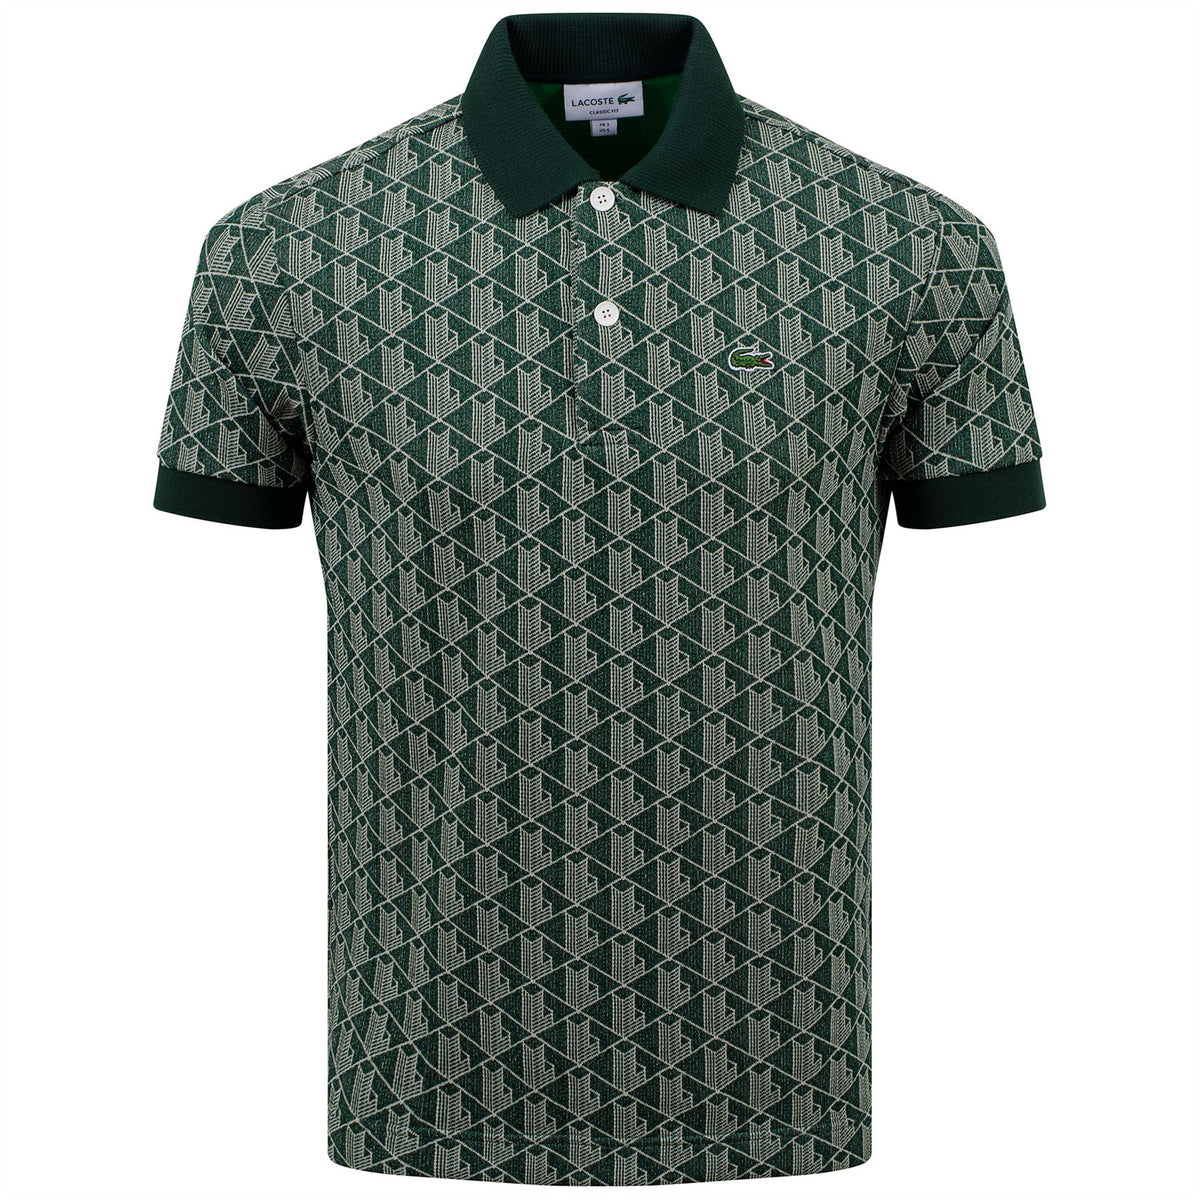 Lacoste mens Classic-fit Printed Jacquard With All-over Jacqaurd Design  Polo Shirt, Green/Wood Shaving, Large US at  Men's Clothing store